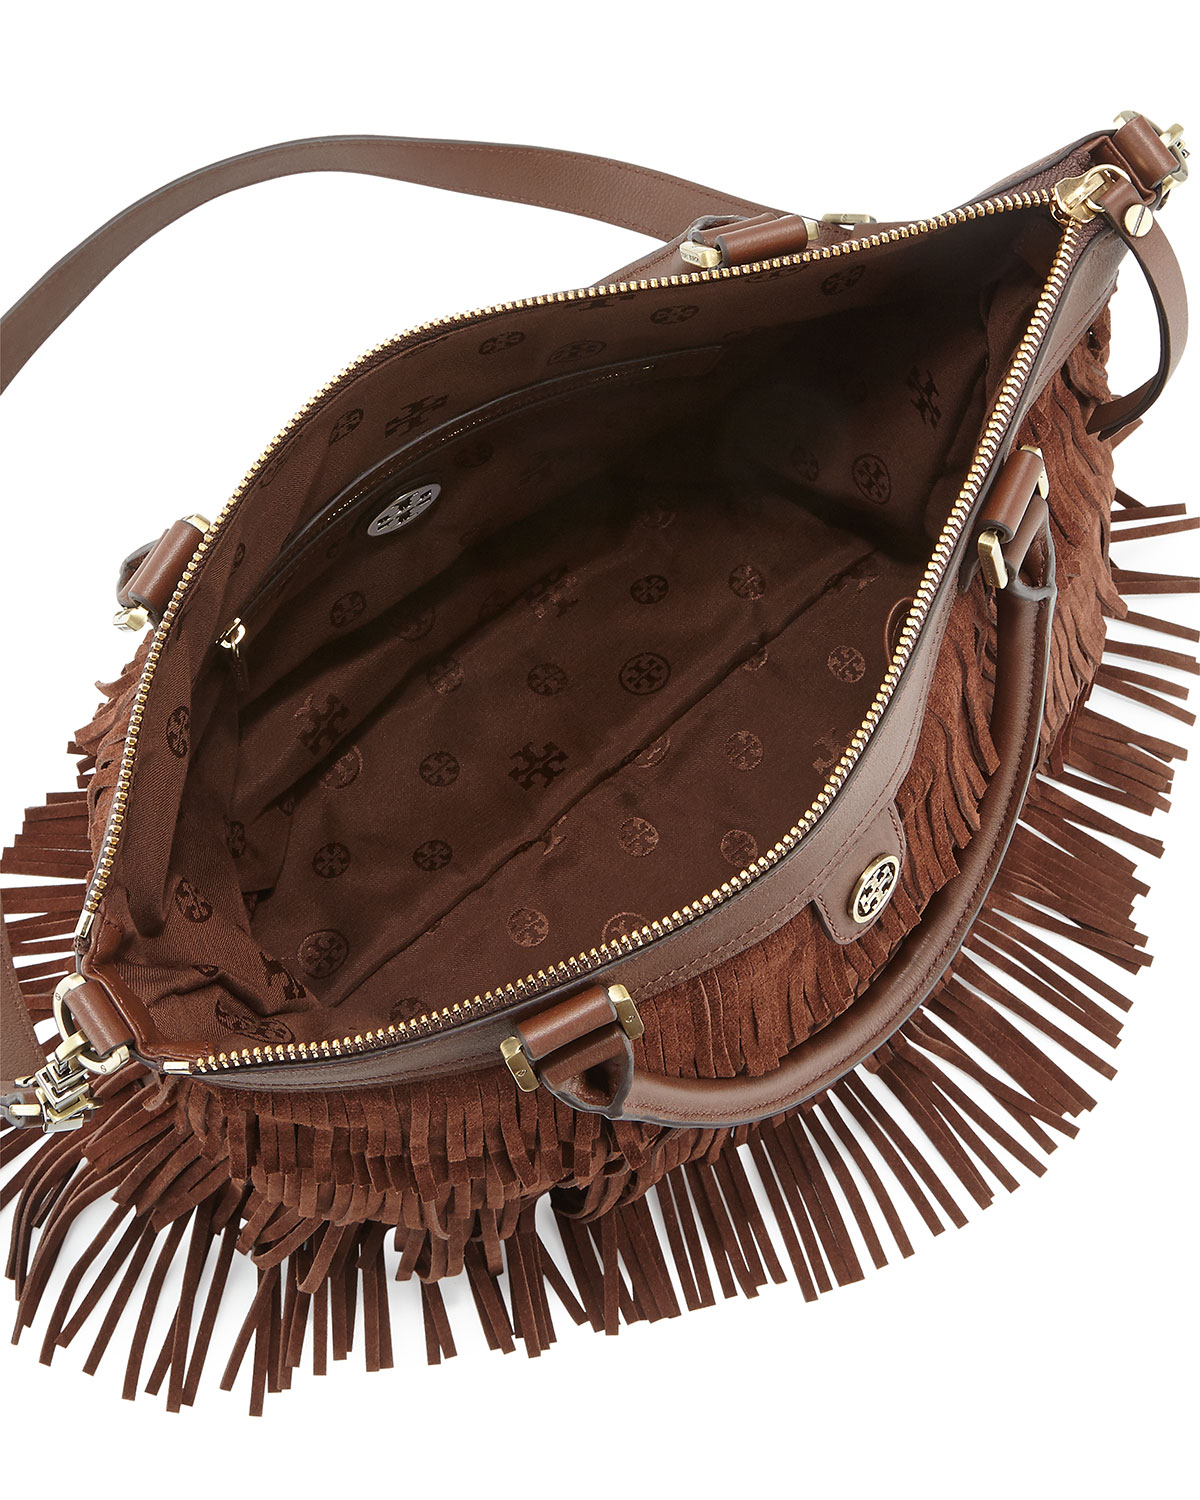 Tory Burch Leather Fringe Tote Bag Chocolate in Brown - Lyst